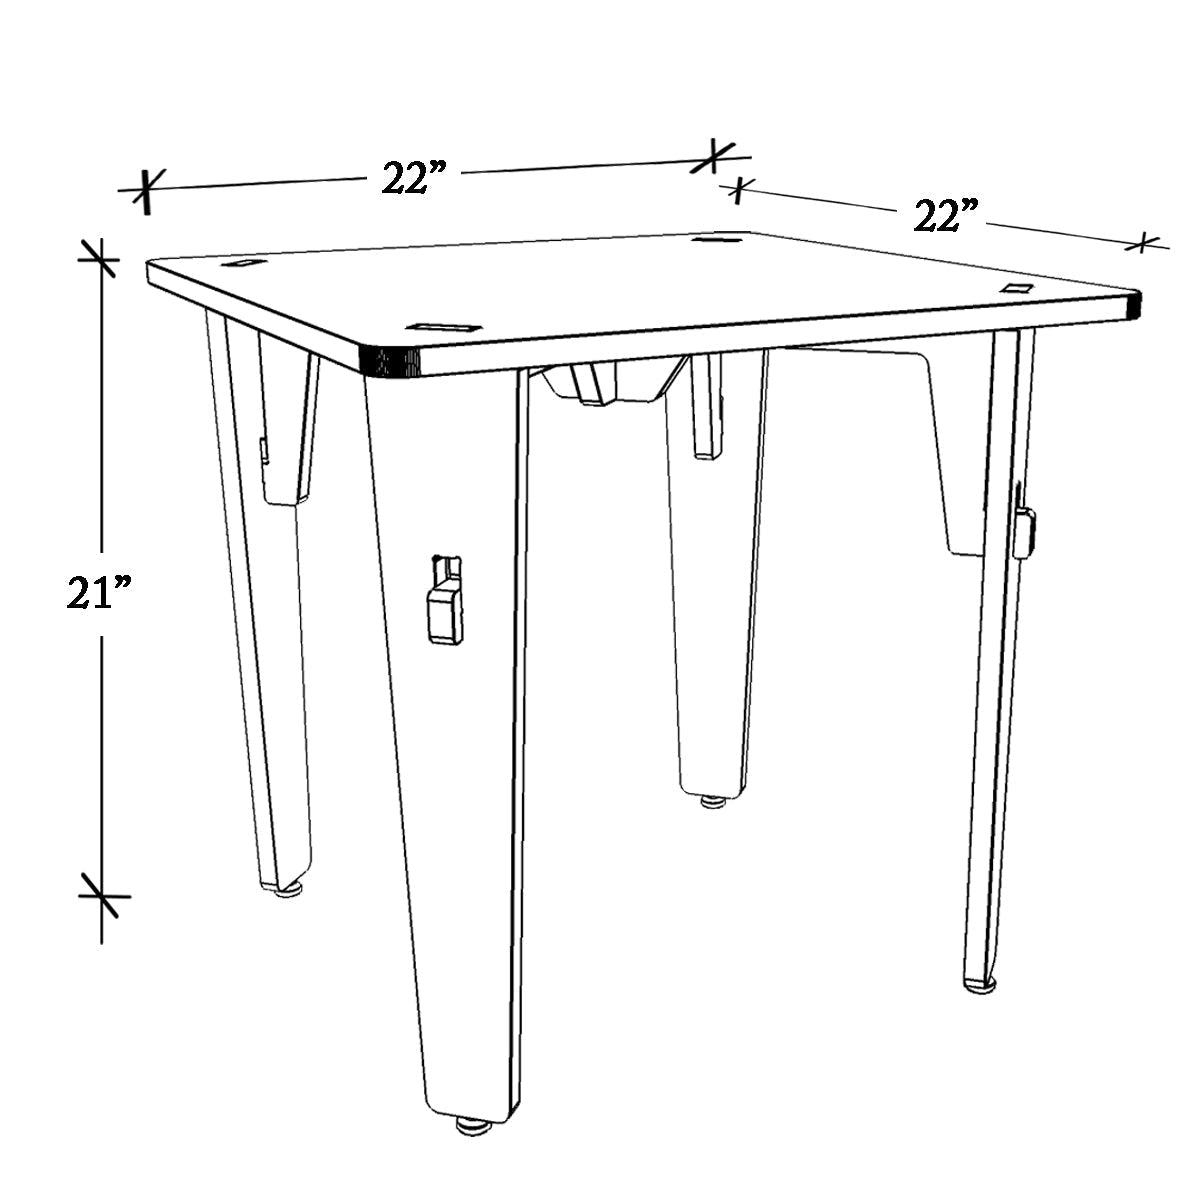 X&Y Lime Fig Table - Natural - FG130918N